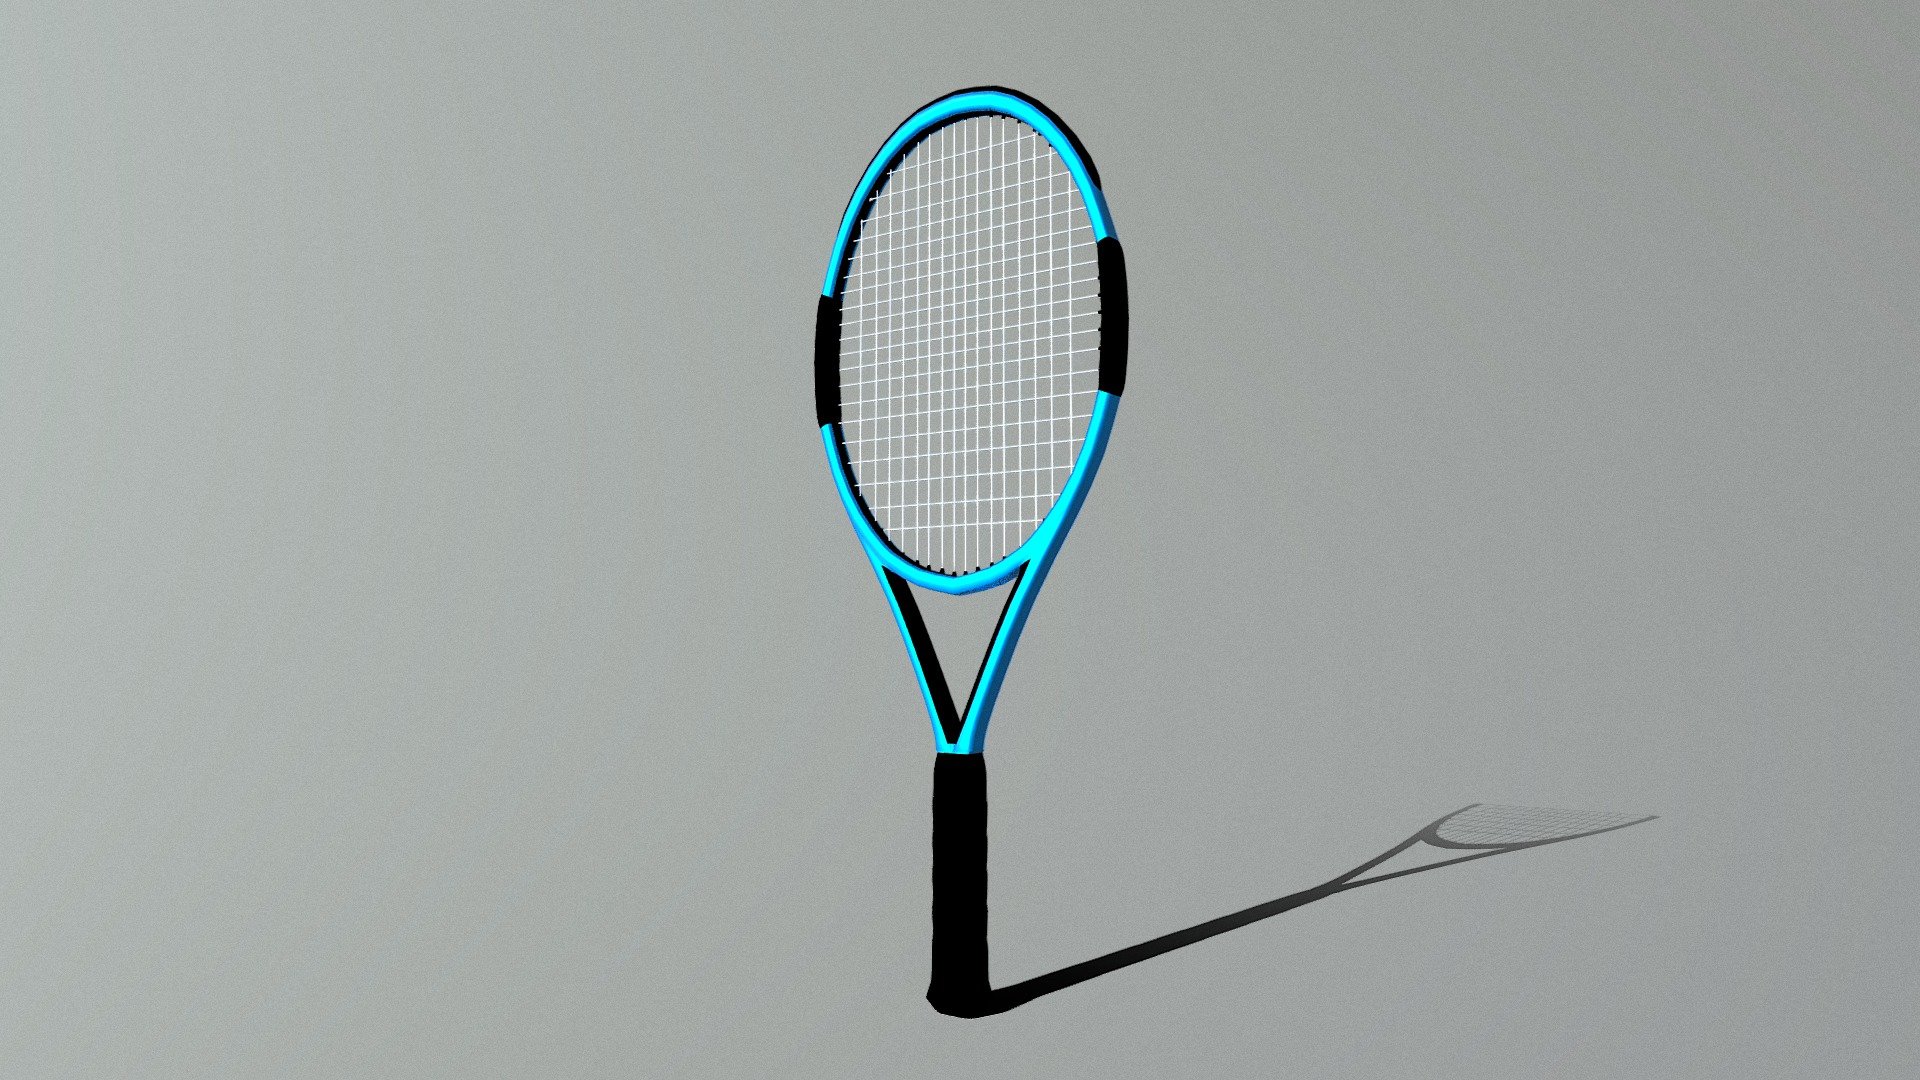 Squash racket and ball

Racquetball racket and ball
A racket or racquet[1] is a sports implement consisting of a handled frame with an open hoop across which a network of strings or catgut is stretched tightly. It is used for striking a ball or shuttlecock in games such as squash, tennis, racquetball, and badminton. Collectively, these games are known as racket sports. This predecessor to the modern game of squash, rackets, is played with 30 1⁄2-inch-long (77 cm) wooden rackets. While squash equipment has evolved in the intervening century, rackets equipment has changed little 3d model